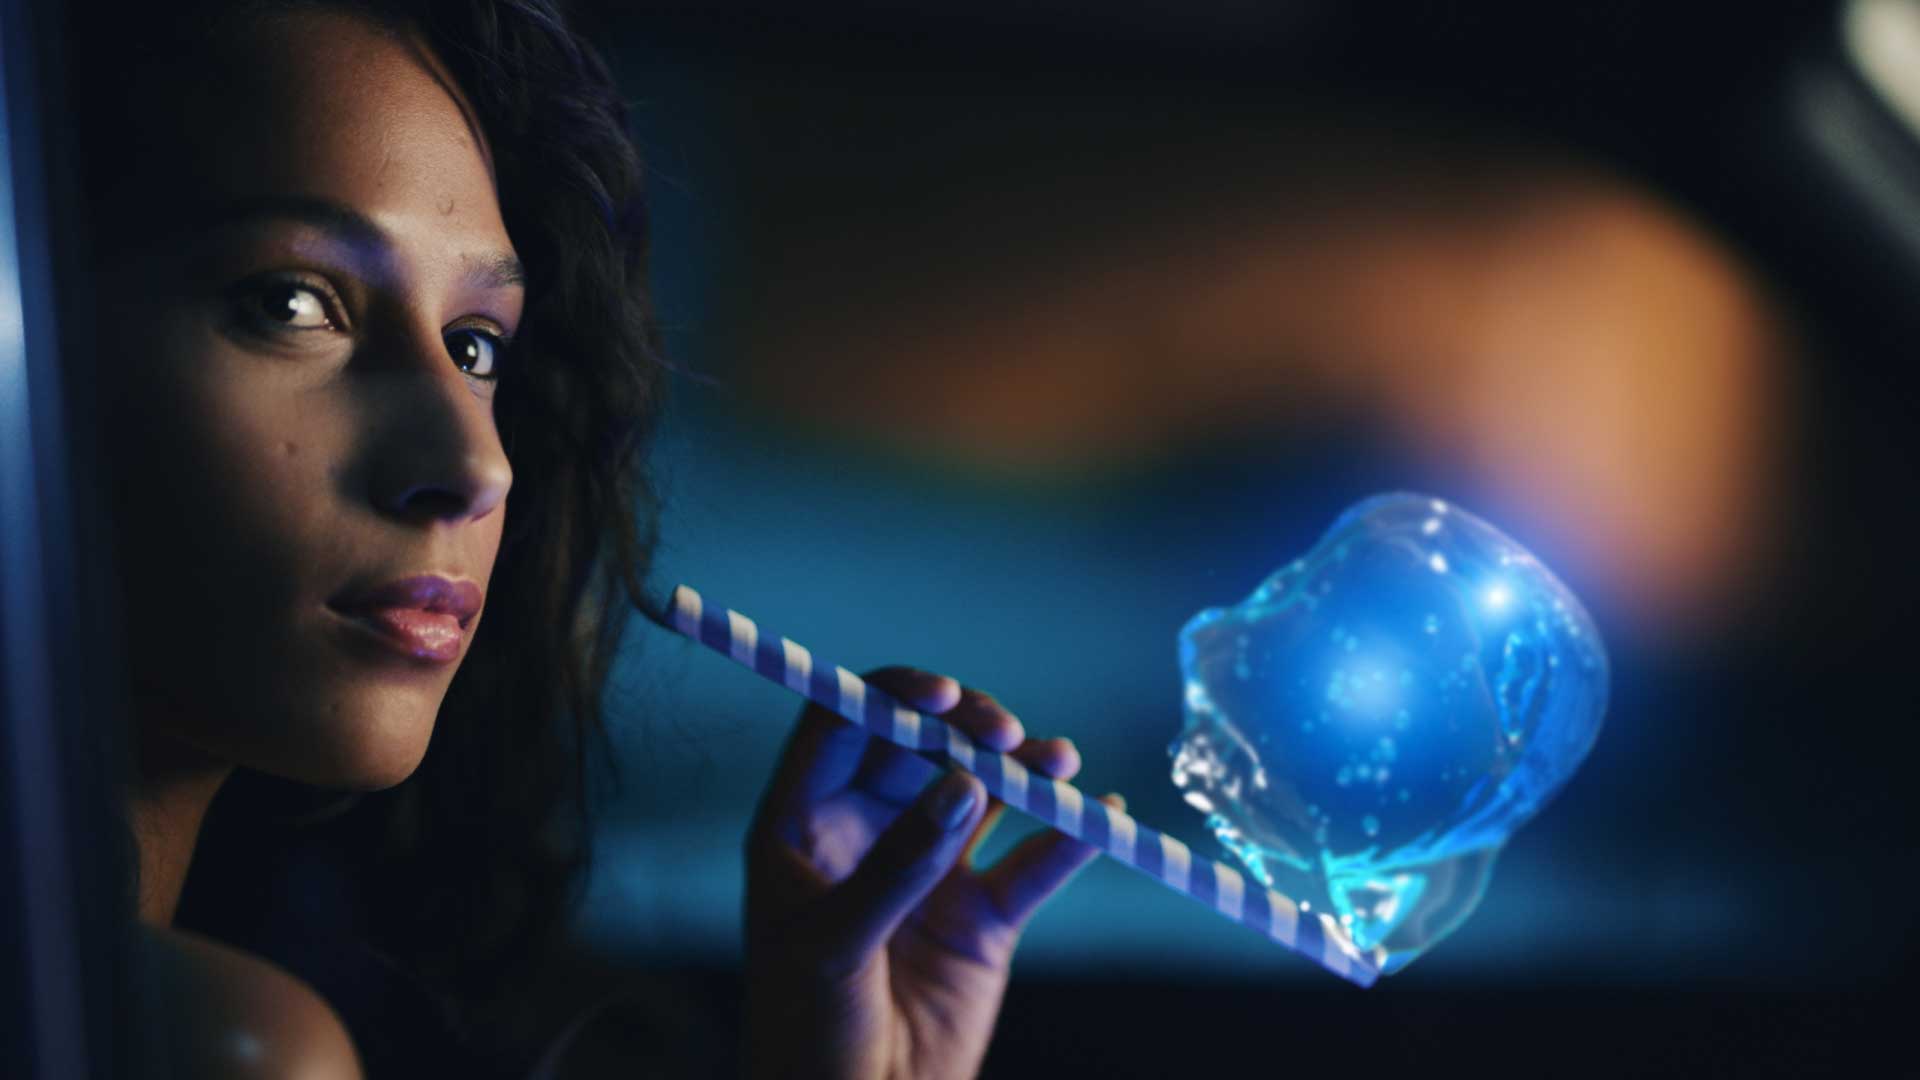 Woman with straw and bubble. Still from Toyota Yaris commercial.